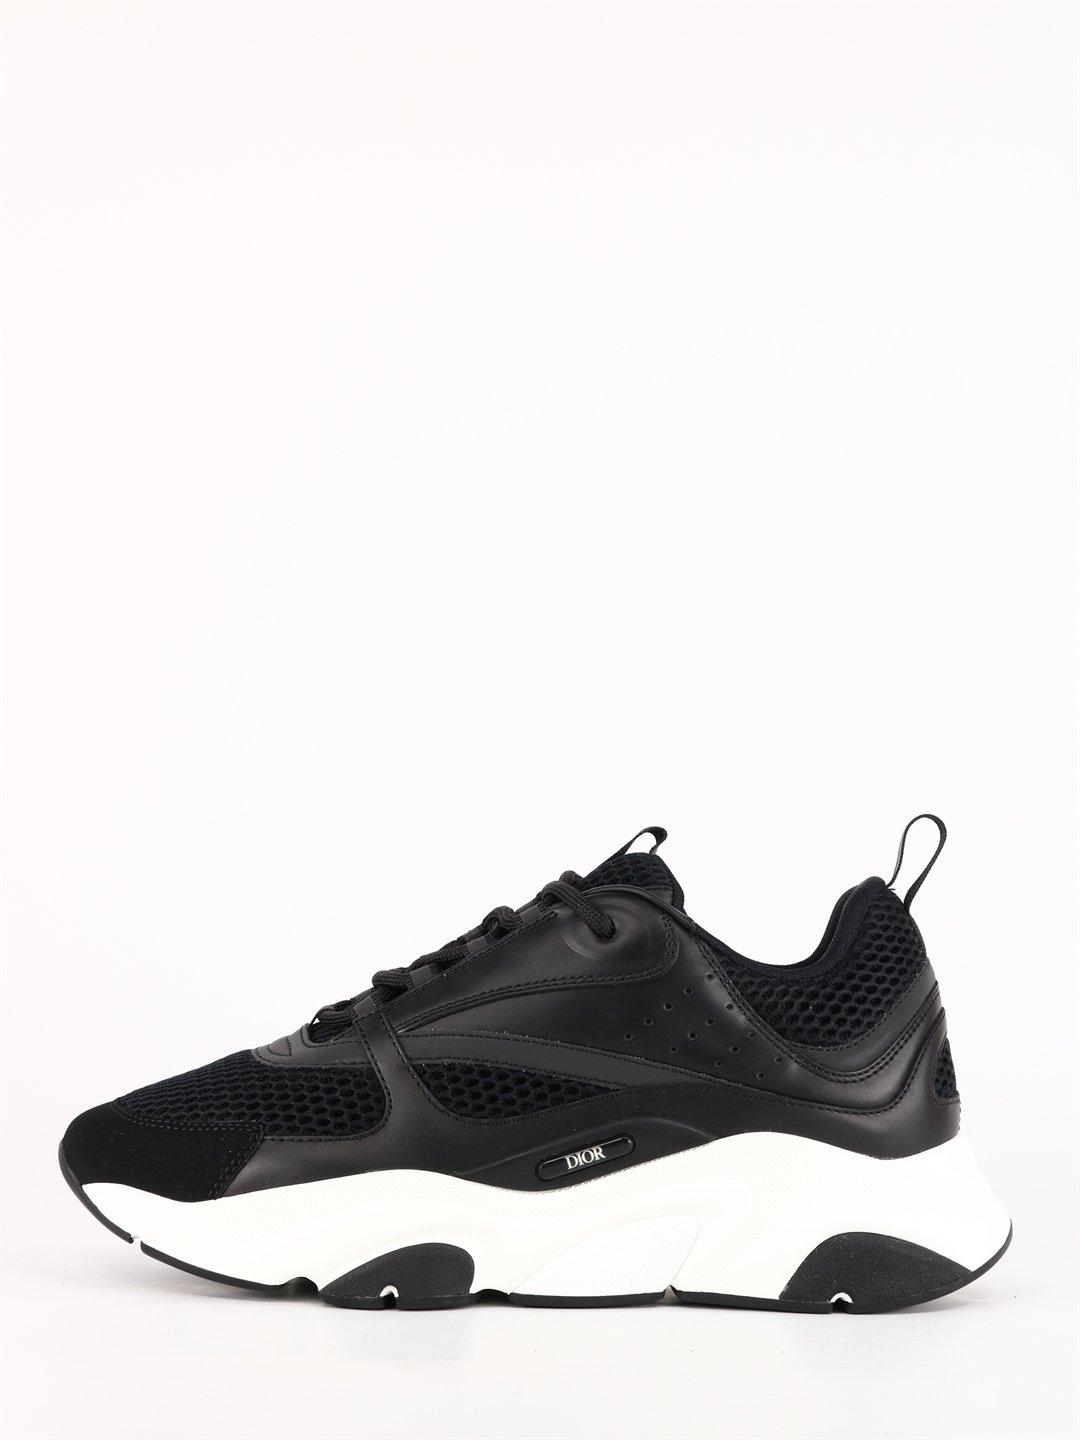 Let's Closer To The Dior B22 Black sneaker